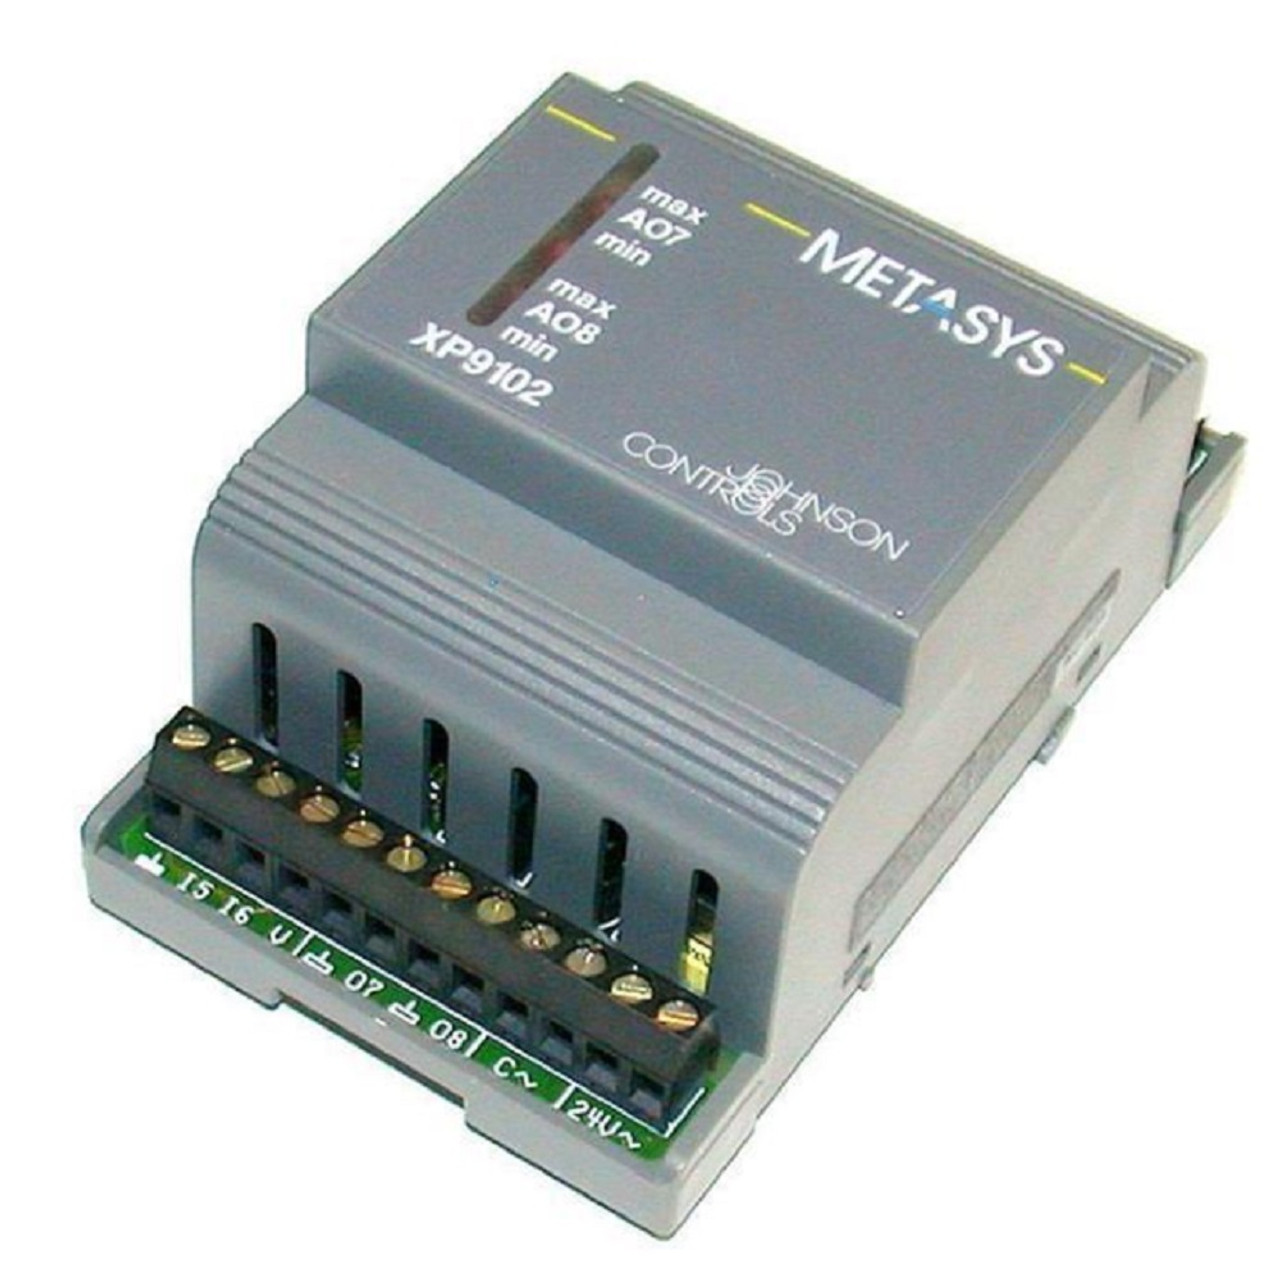 Johnson Controls XP-9102-8204 Metasys XP9102 Extension Module 6 Analog in 2 Out [New]